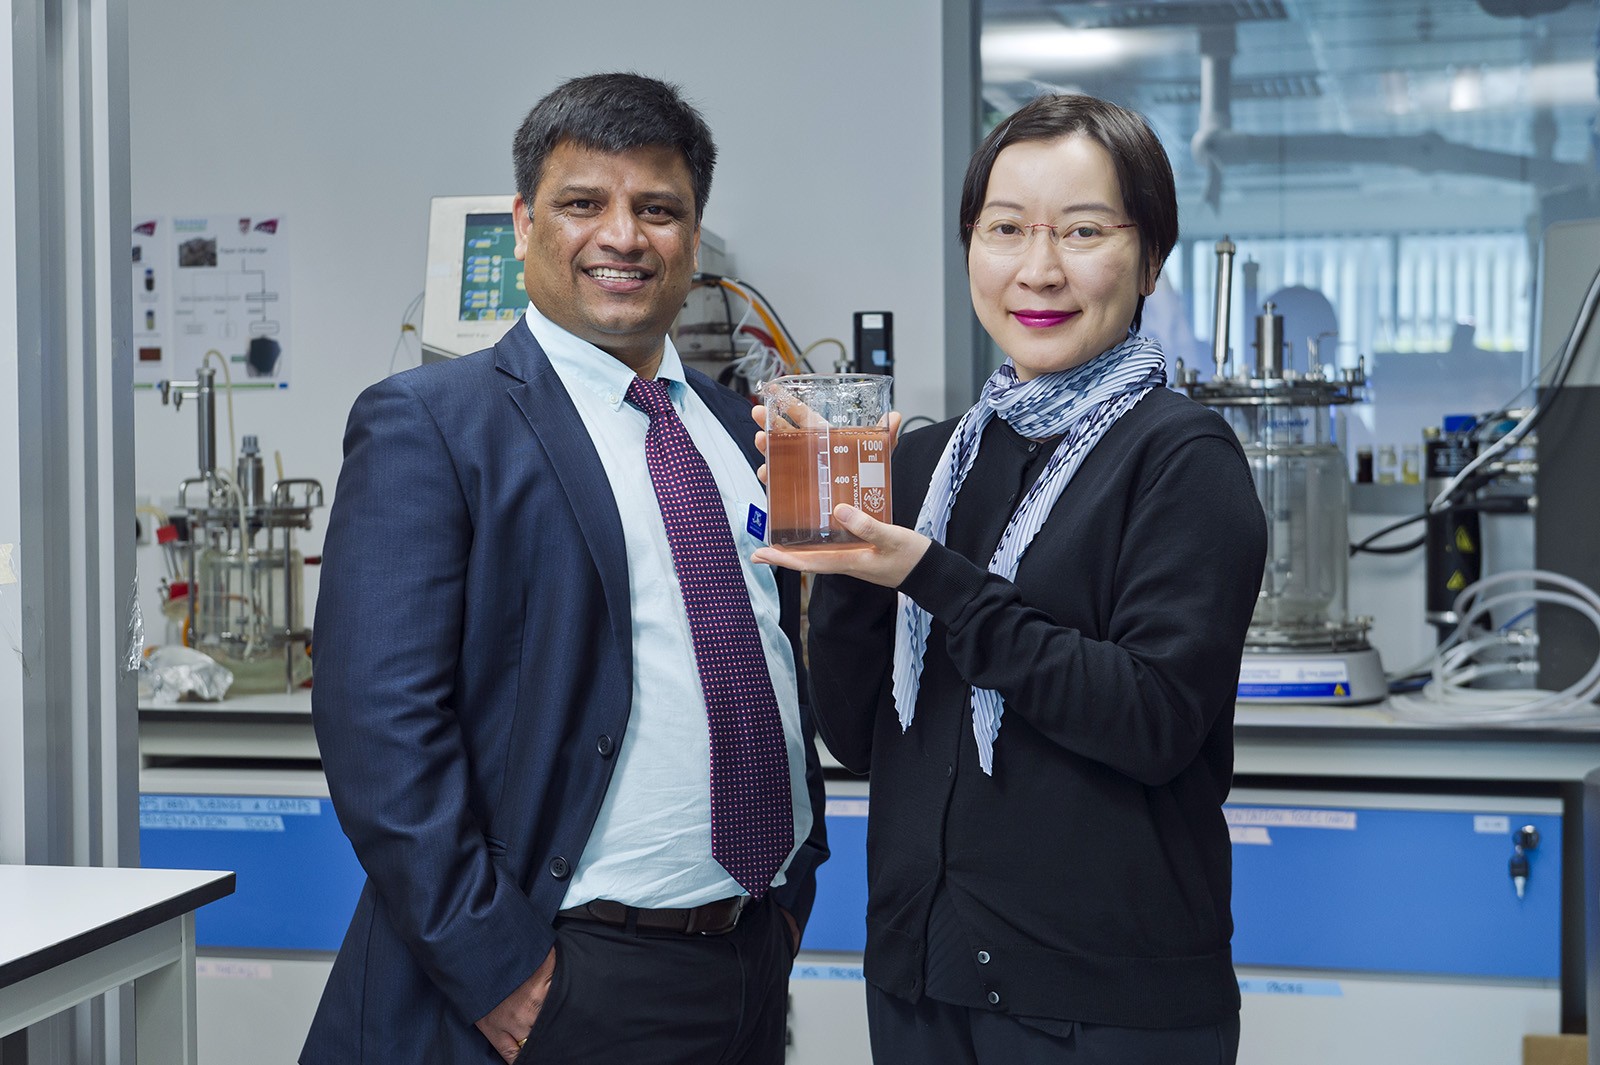 Dr Carol Lin (right) researches the use of cellulose based hydrogel to cultivate 10 distinct probiotic bacterial simultaneously in collaboration with Dr Srinivas Mettu at the University of Melbourne, Australia.